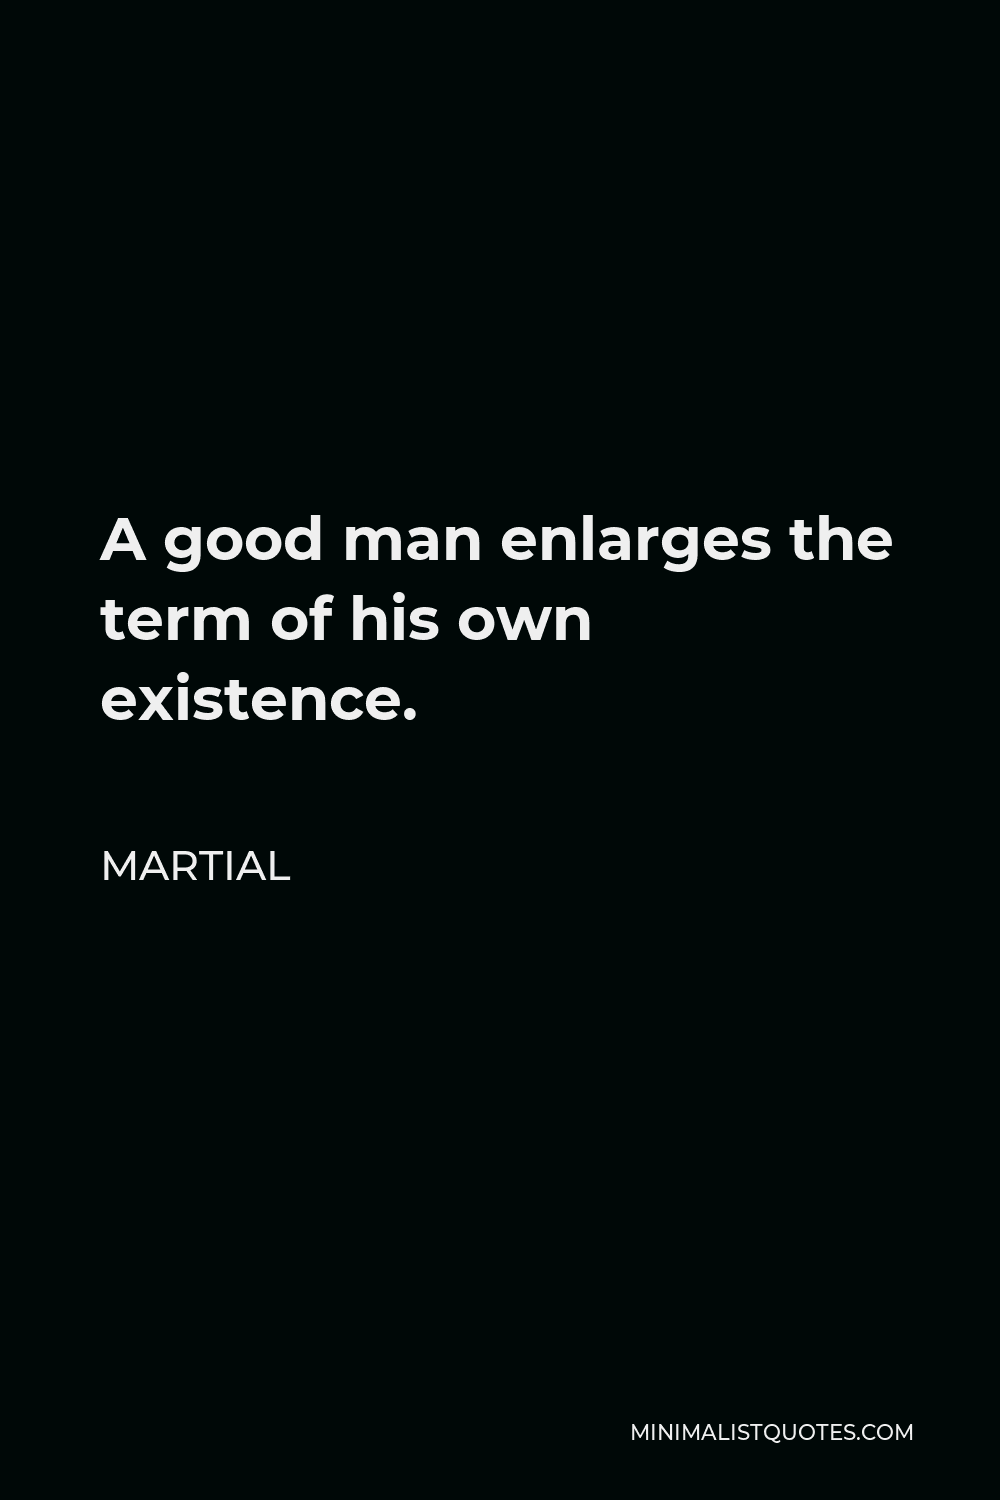 Martial Quote - A good man enlarges the term of his own existence.